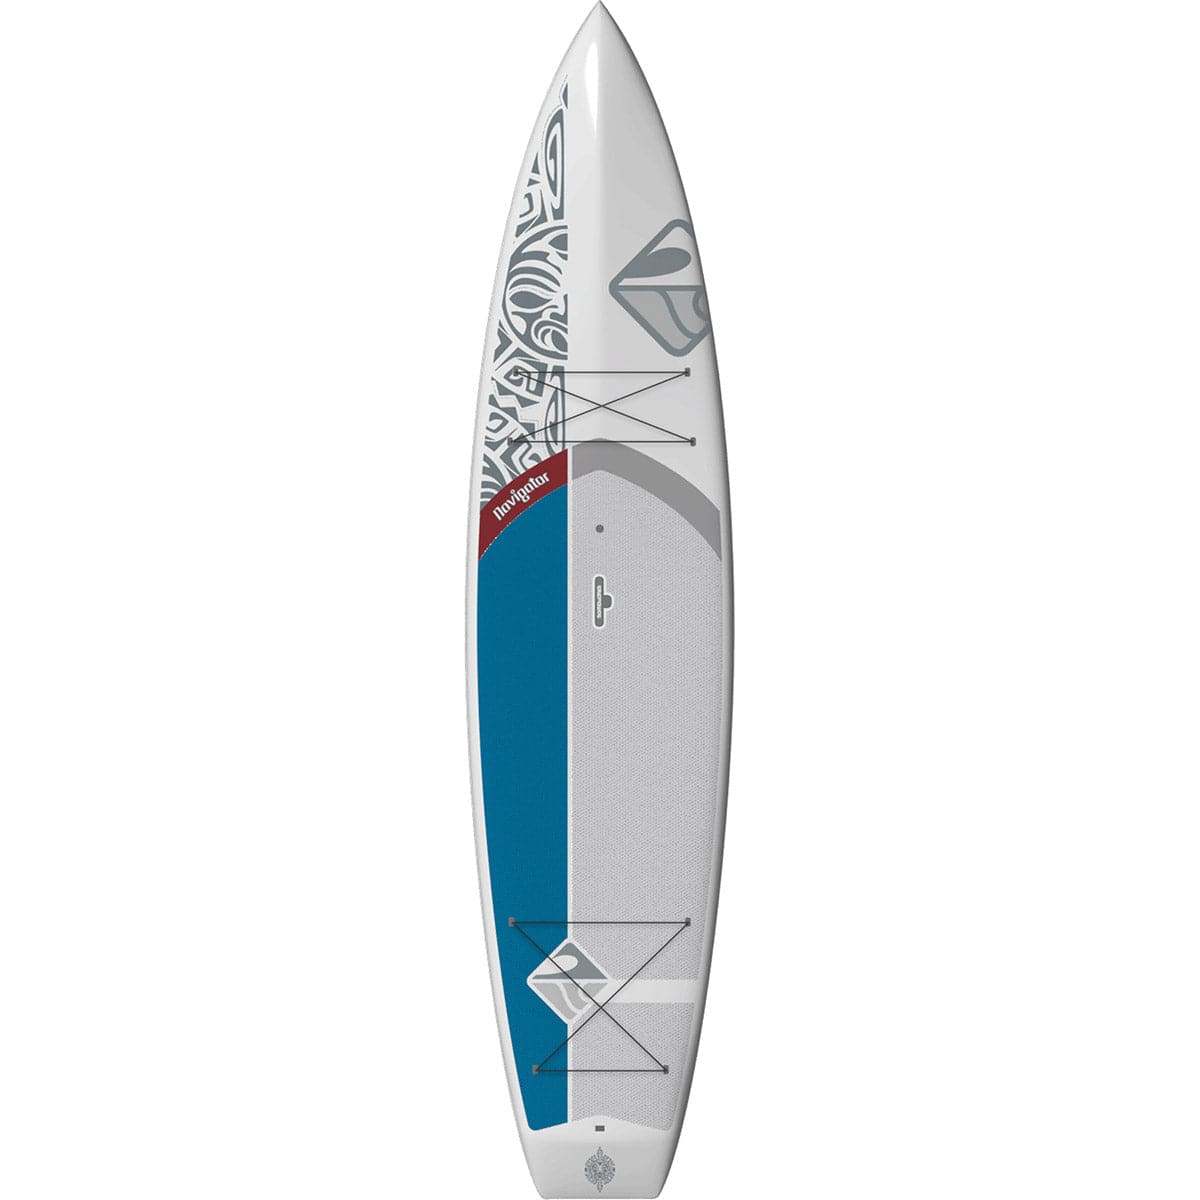 Featuring the Navigator 11'6 rigid sup manufactured by Boardworks shown here from one angle.